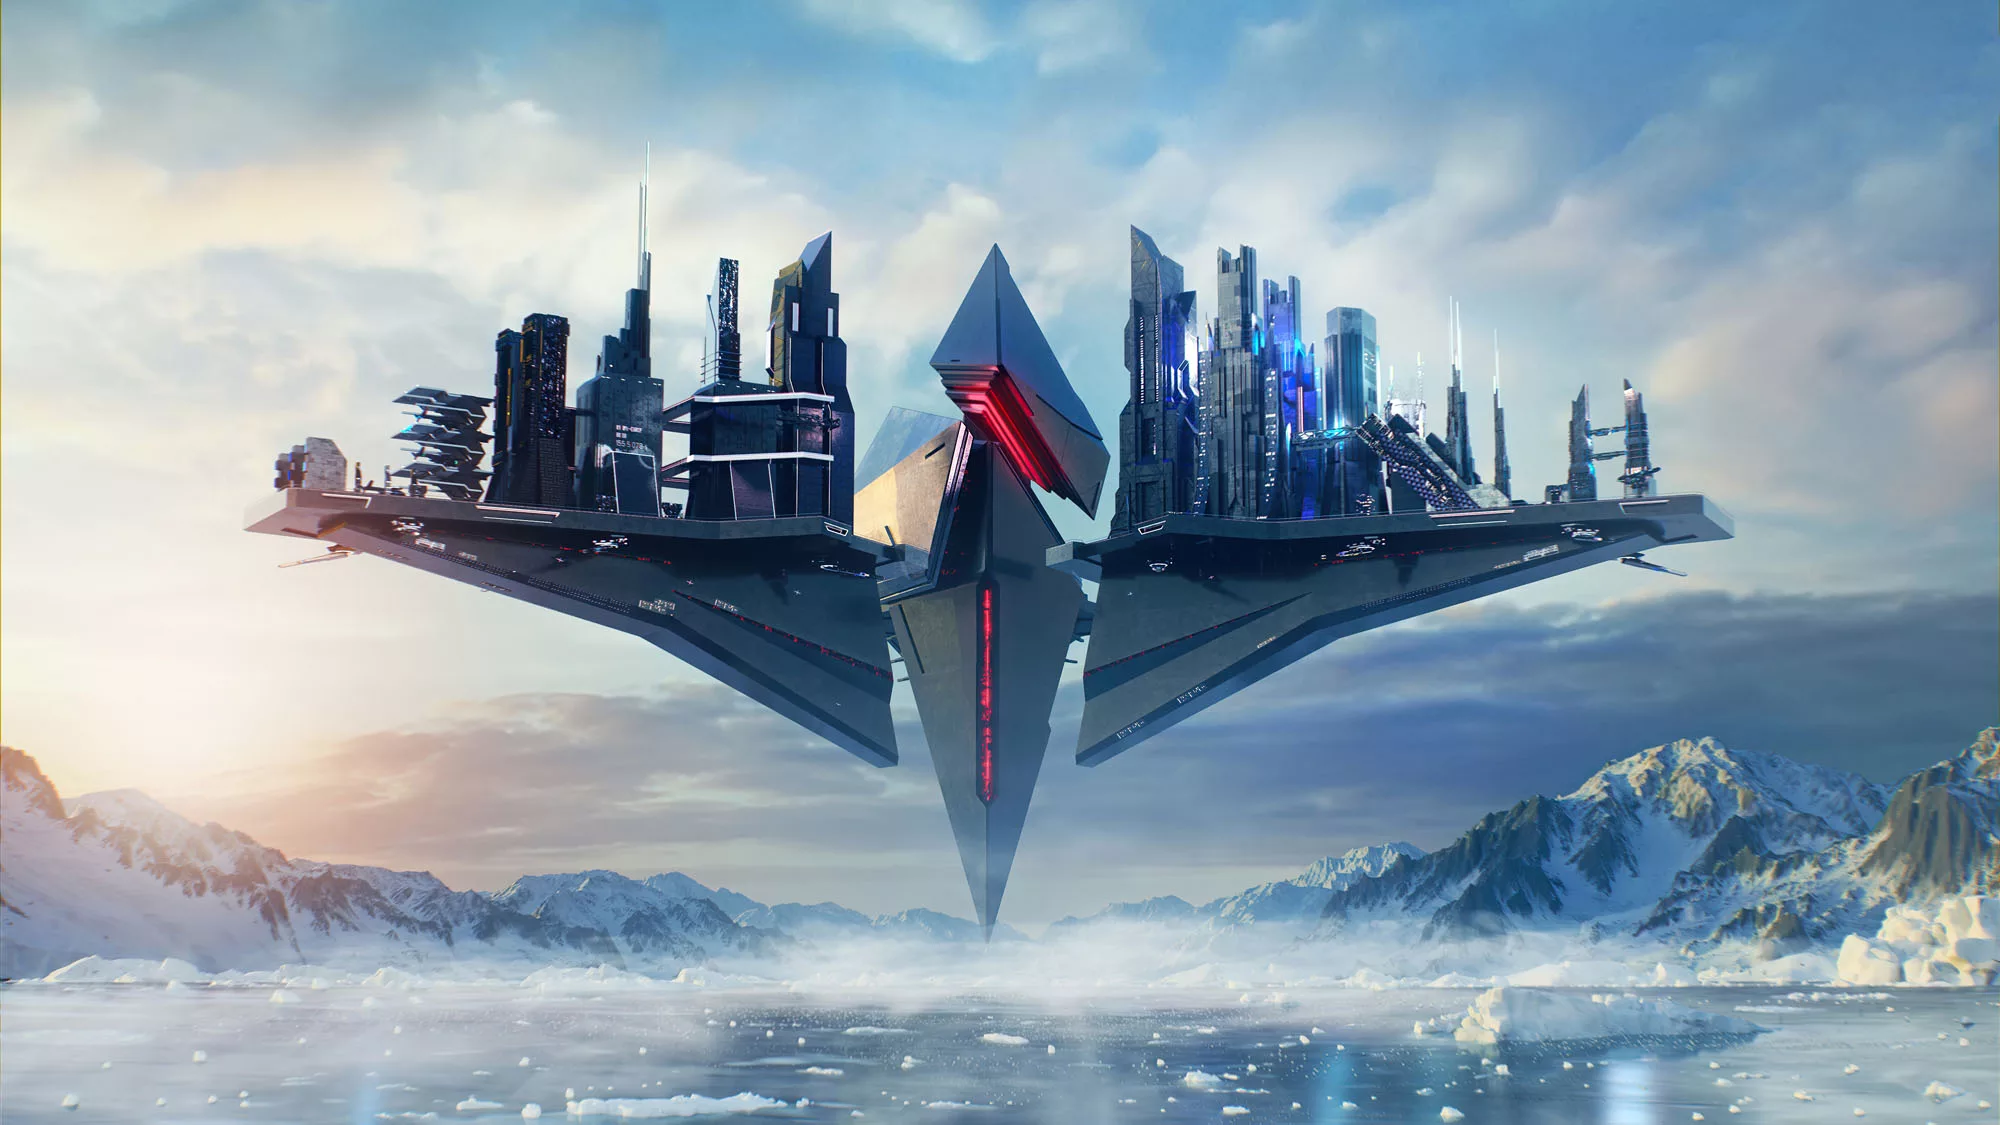 A futuristic city floating in a blue sky over a frozen lake.